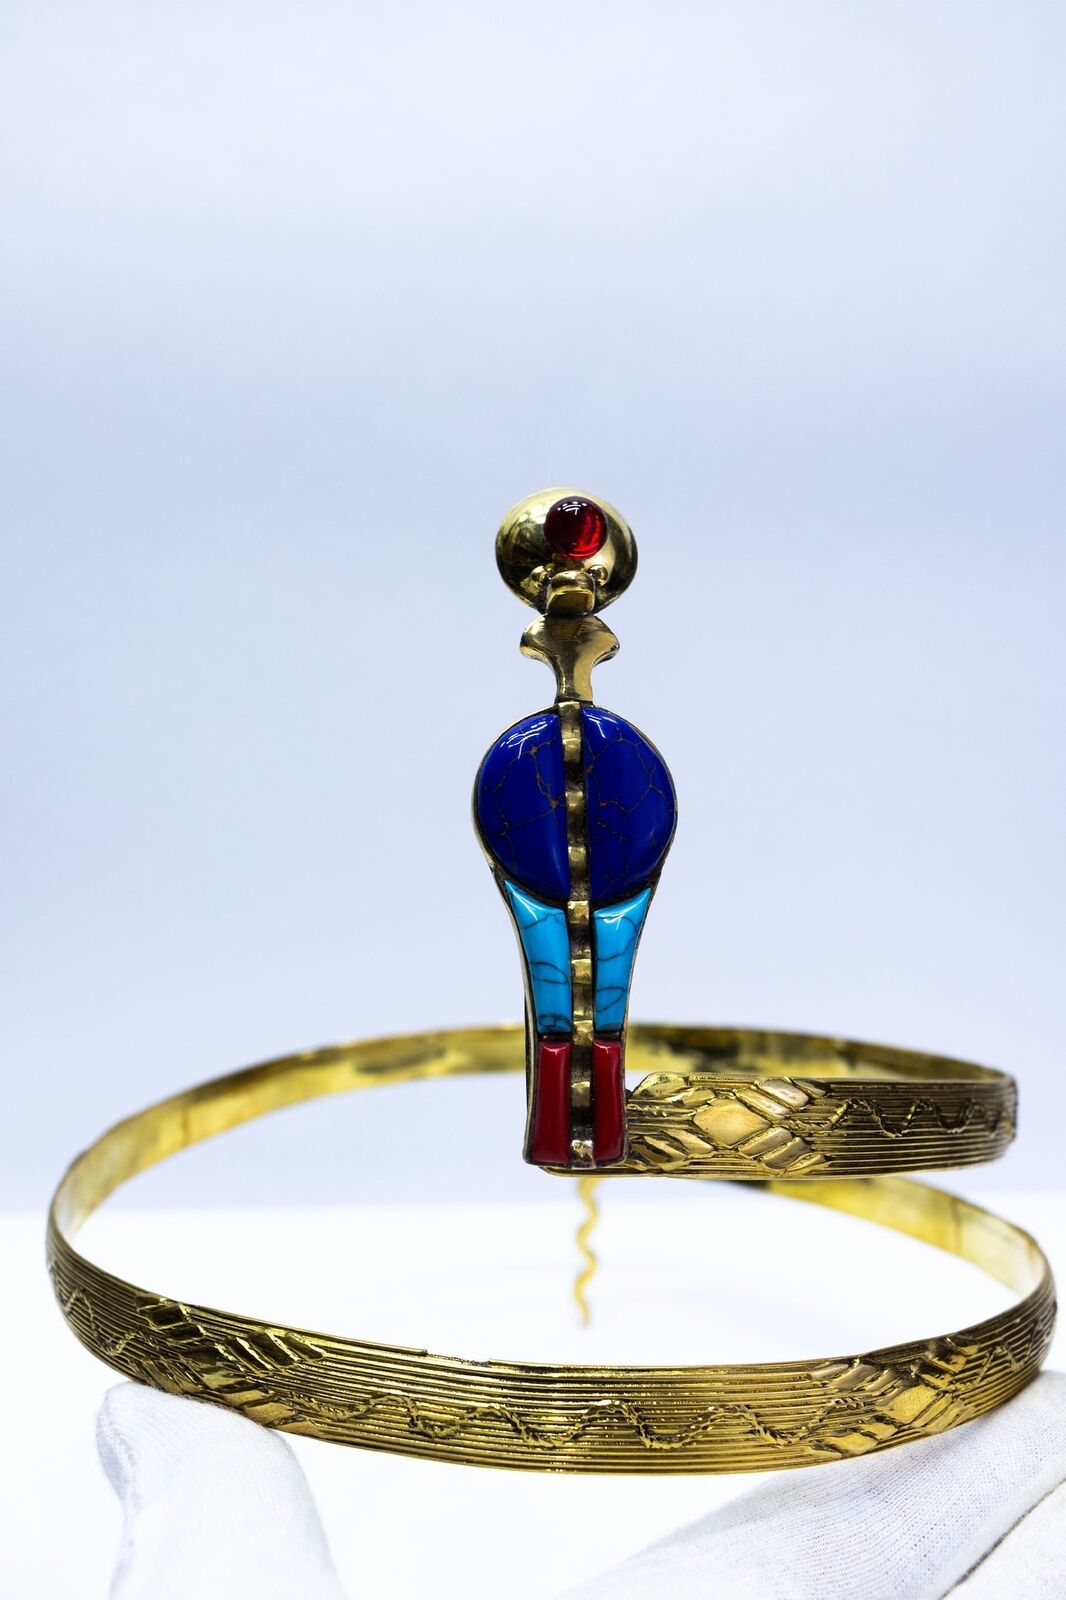 Gemstones Egyptian crown with the cobra, made in Egypt with care and love